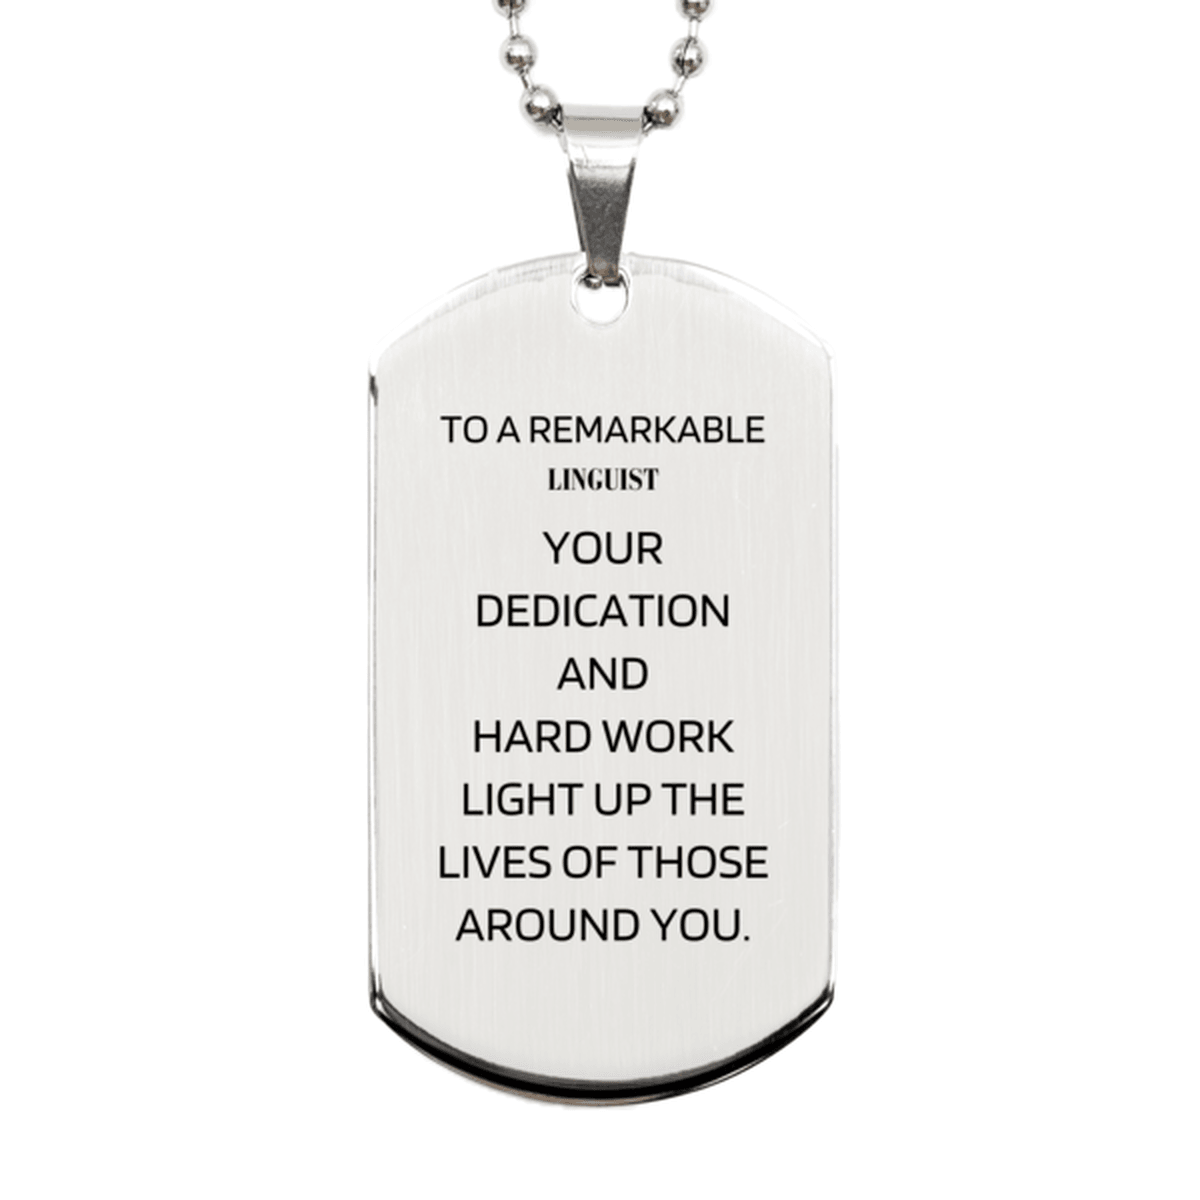 Remarkable Linguist Gifts, Your dedication and hard work, Inspirational Birthday Christmas Unique Silver Dog Tag For Linguist, Coworkers, Men, Women, Friends - Mallard Moon Gift Shop